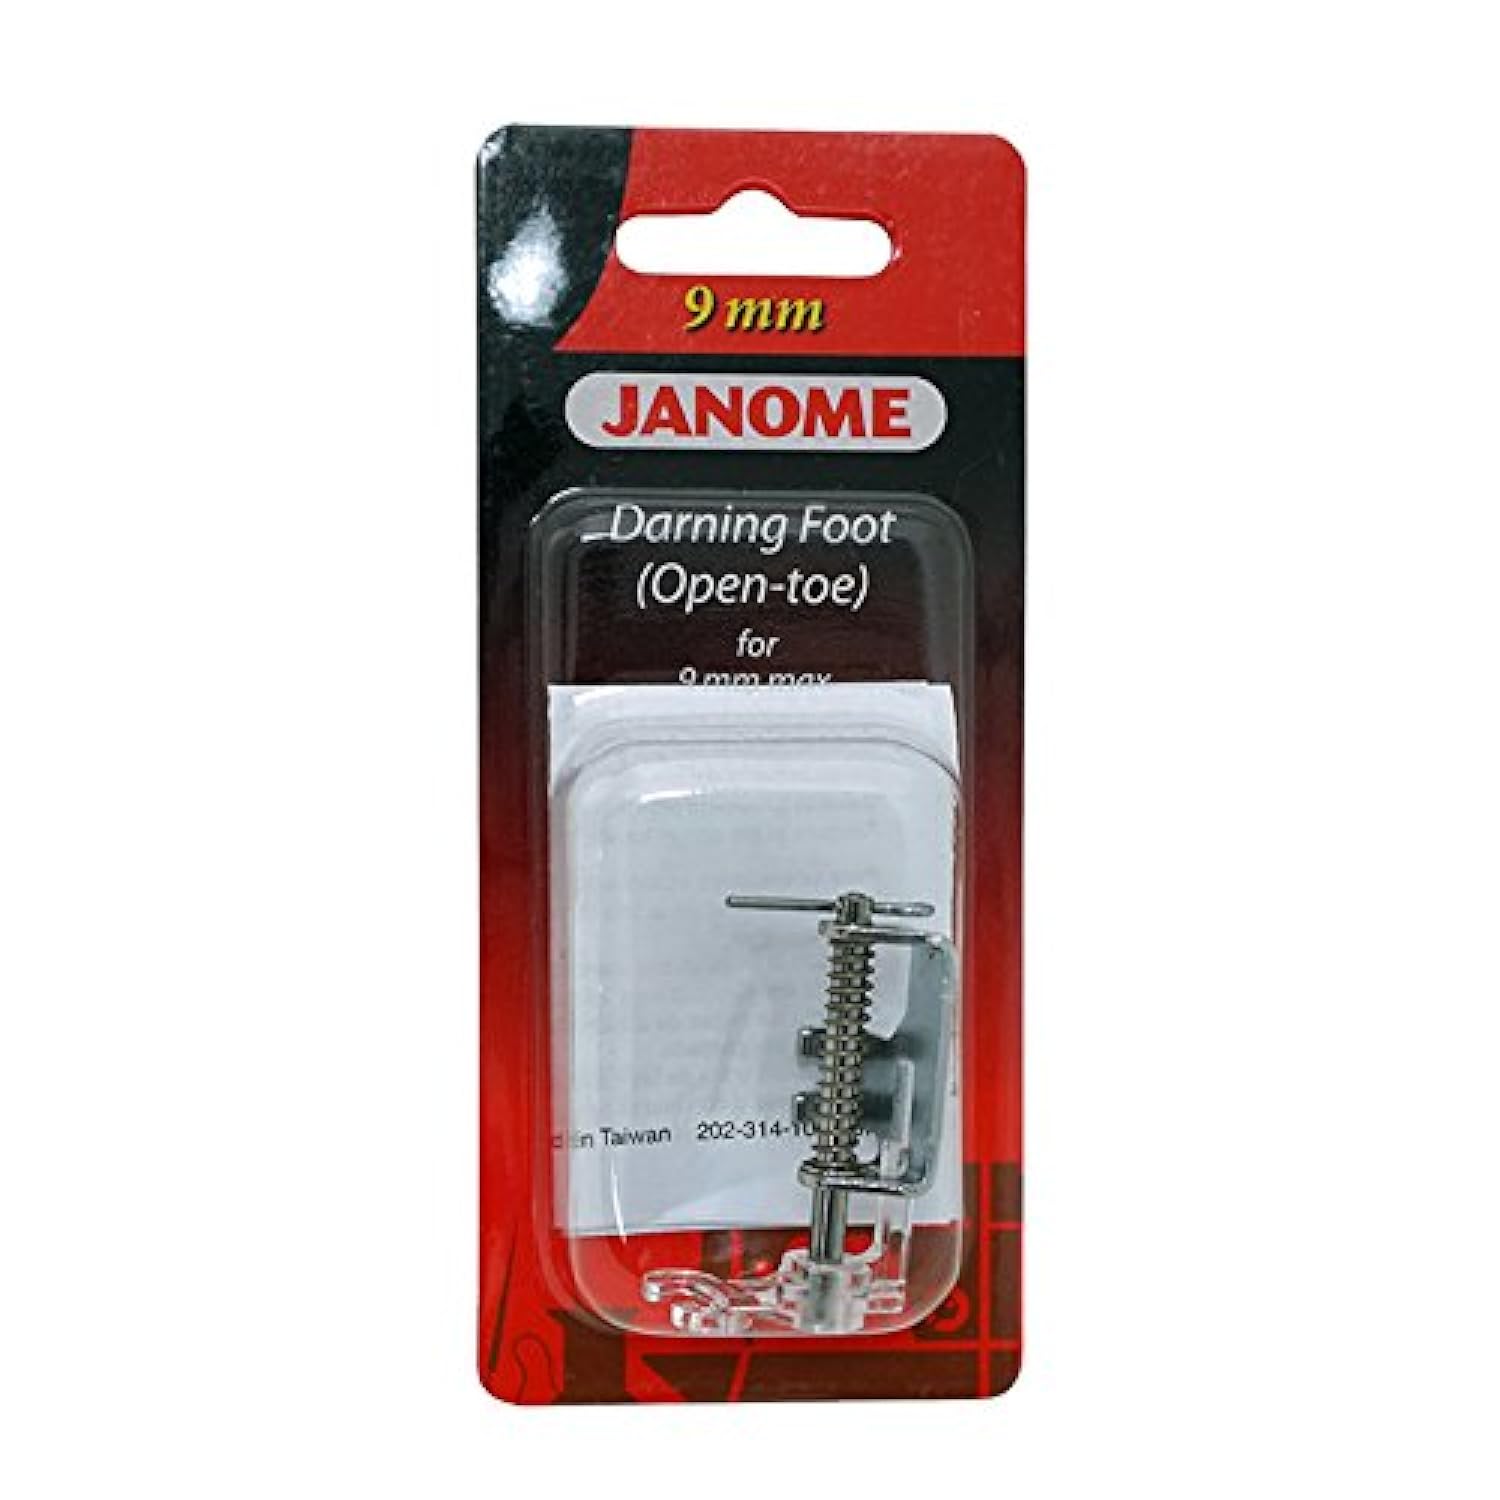 Janome Open-Toe Darning Foot for 9mm Machines